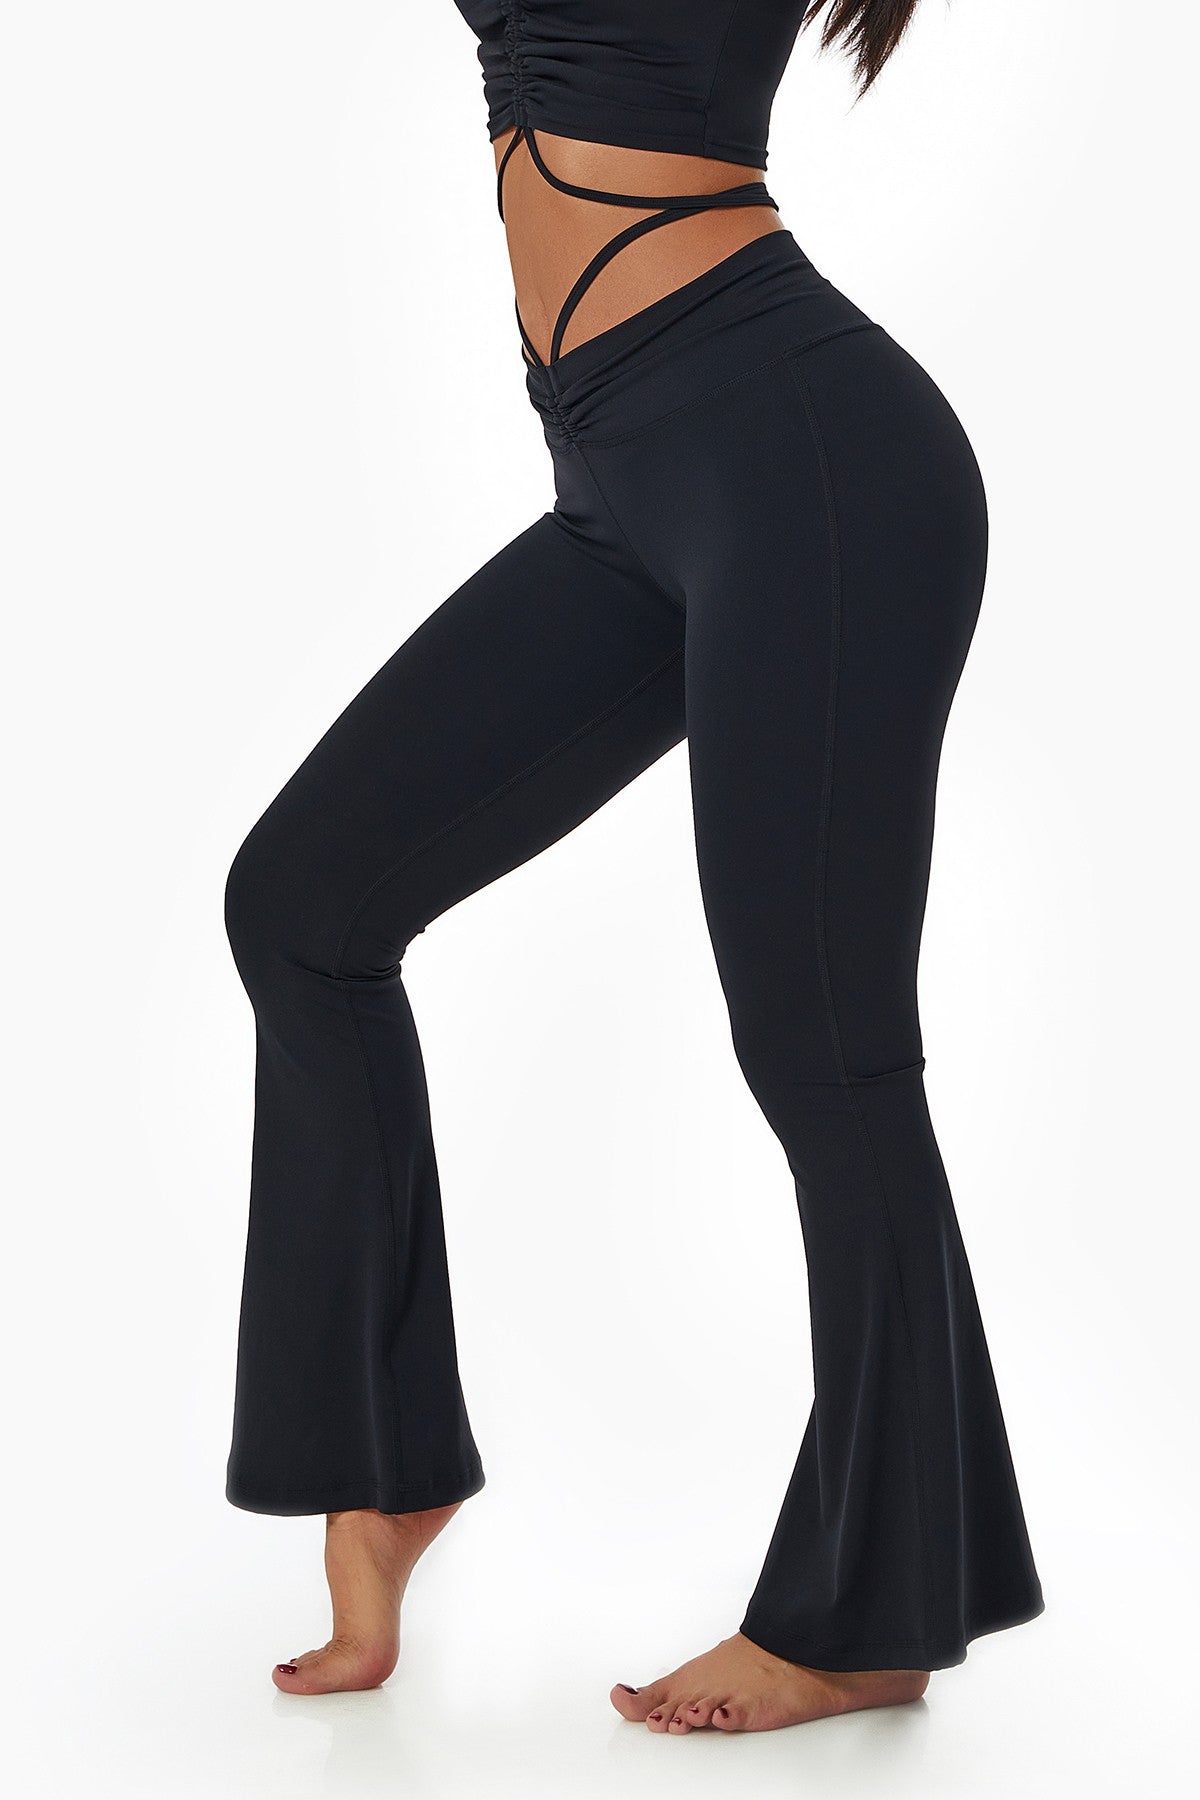 Ruched Front Waist Tie Detail Crossover Flare Leggings For Women – Zioccie